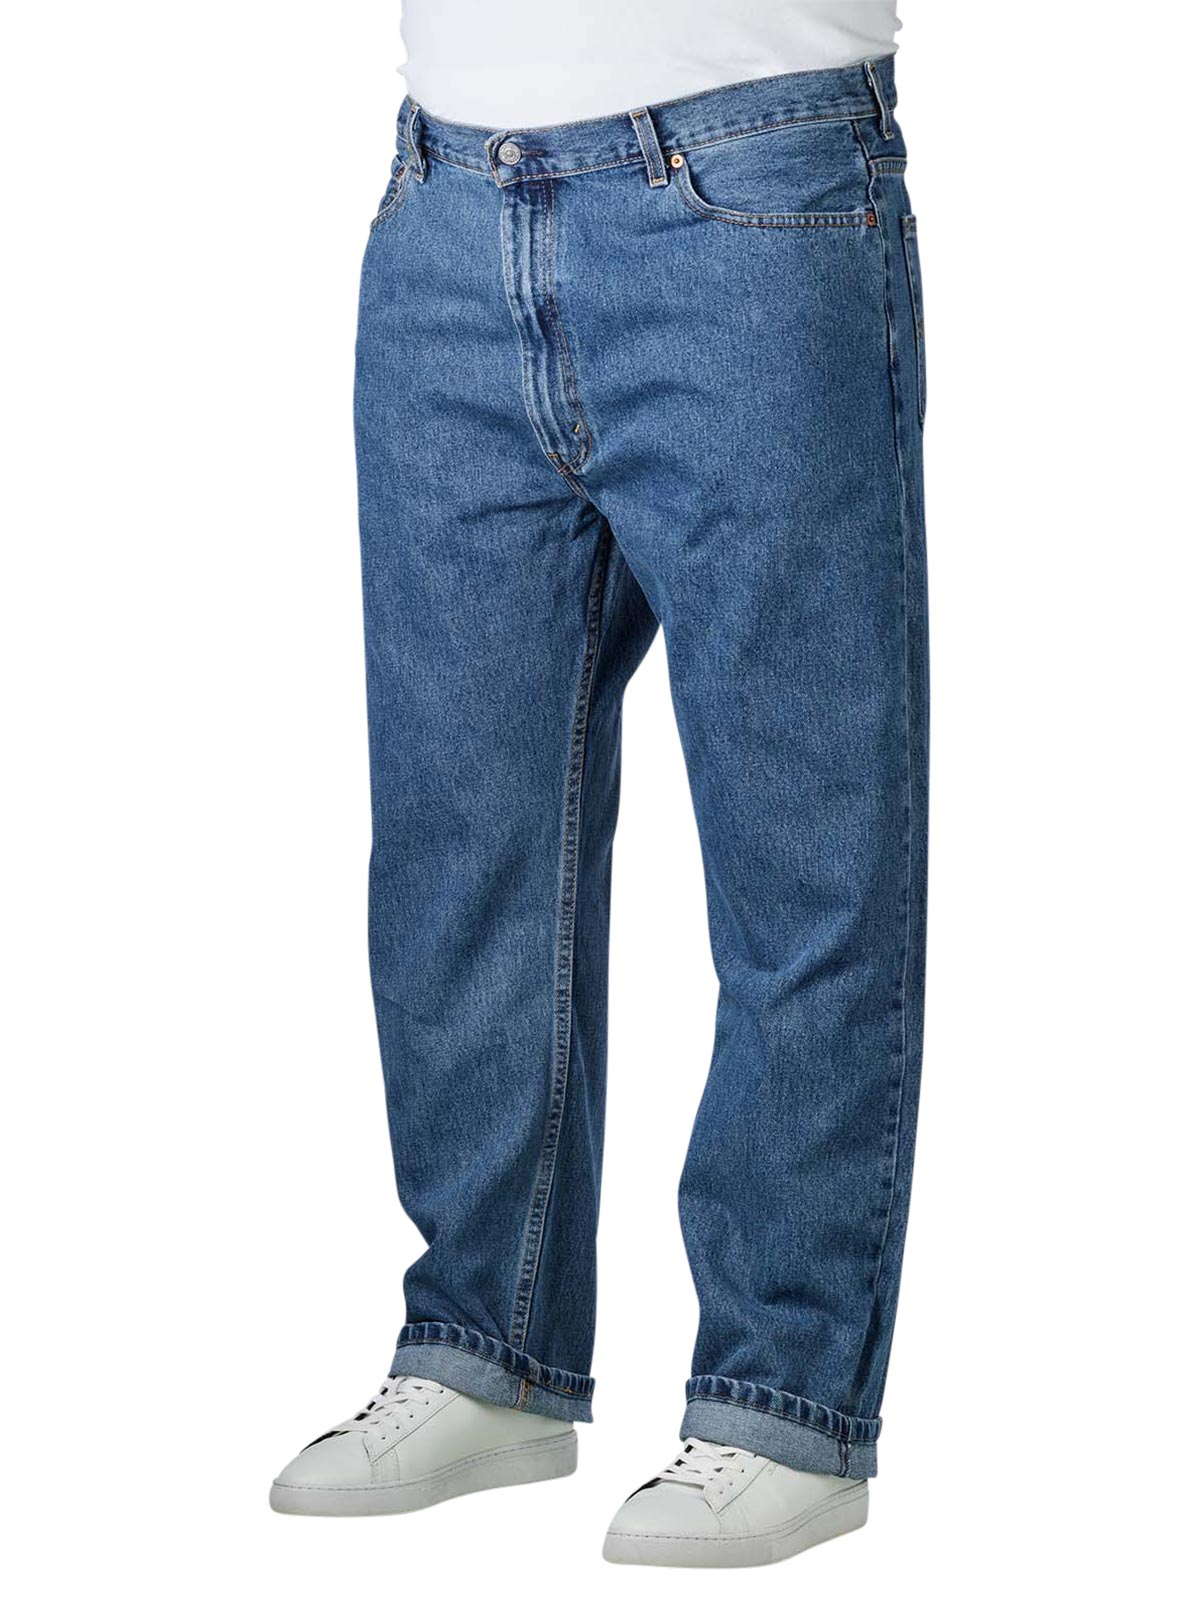 Levi's 505 Jeans Big&Tall stone (zip) Levi's Men's Jeans | Free Shipping on   - SIMPLY LOOK GOOD